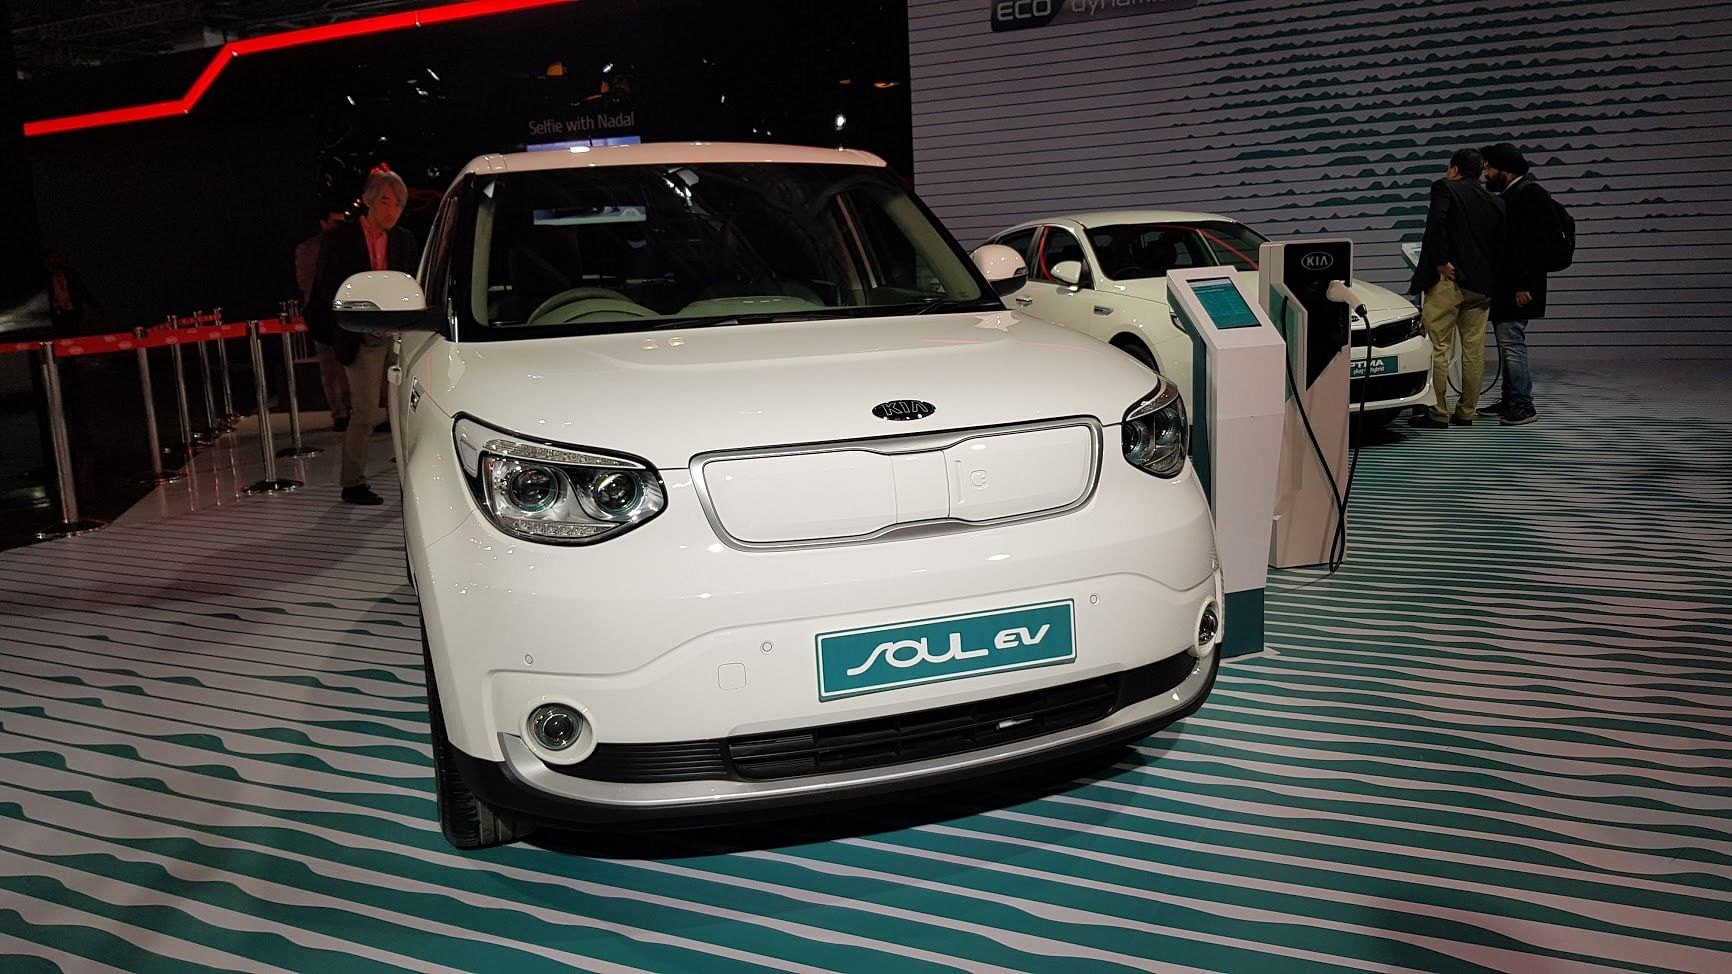 Kia Motors showed the Soul electric vehicle, besides the Niro and Optima hybrids.&nbsp;